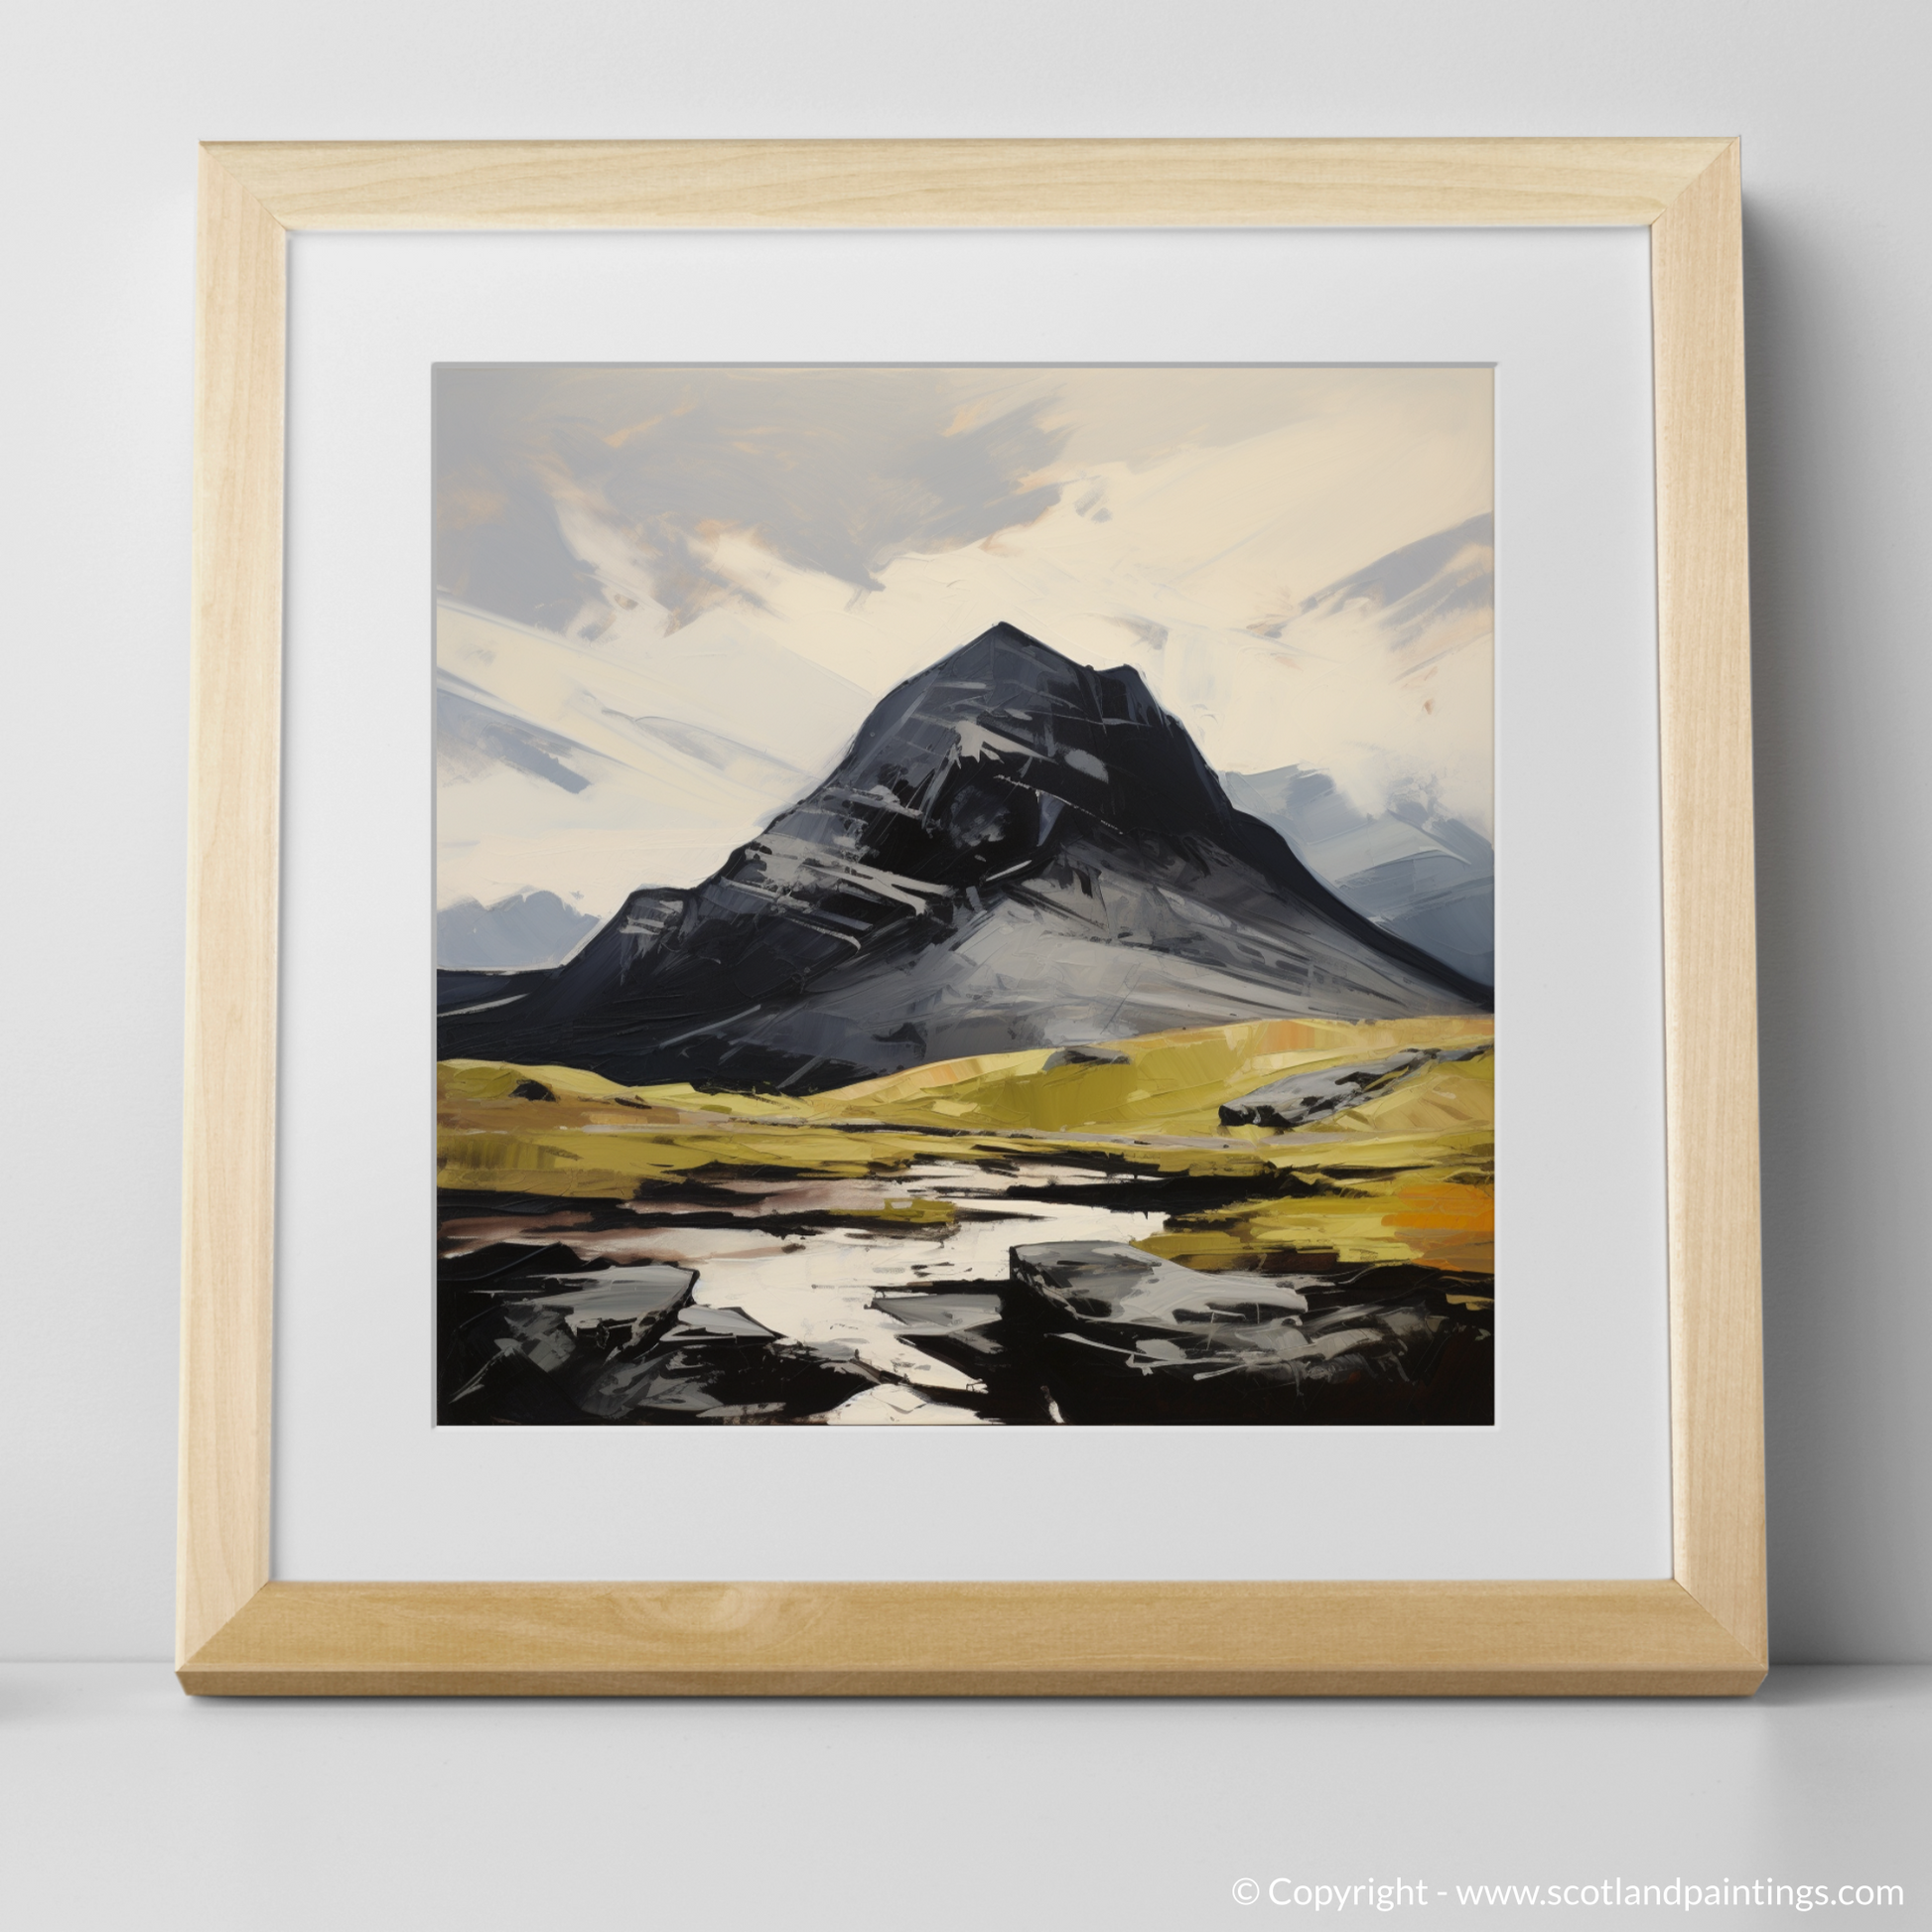 Art Print of Ben More Assynt, Sutherland with a natural frame